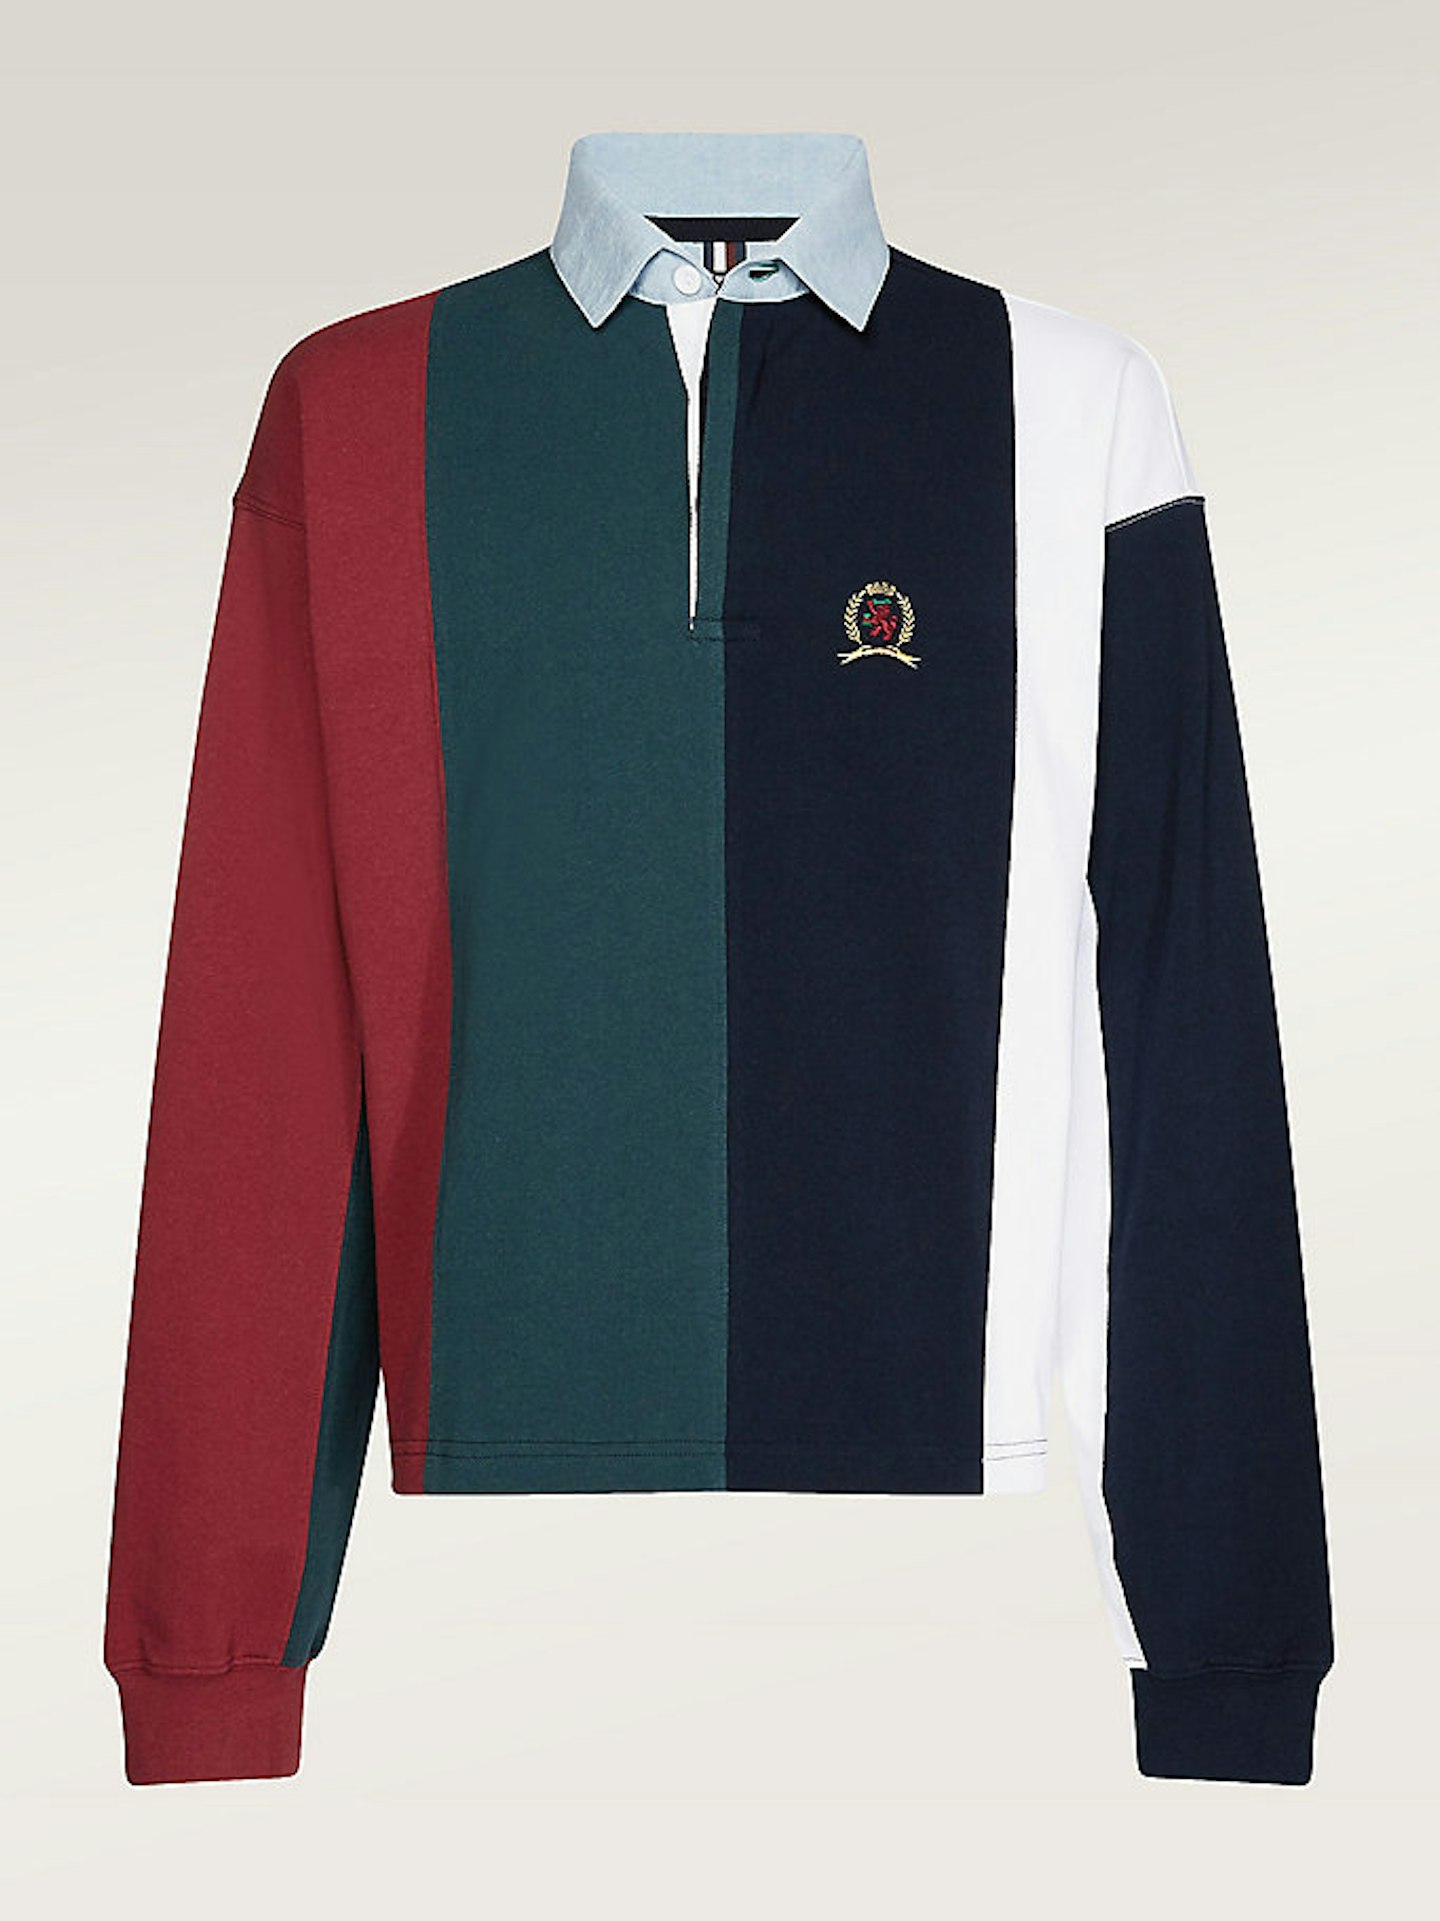 Hilfiger Collection, Rugby Shirt, WAS £160, NOW £128